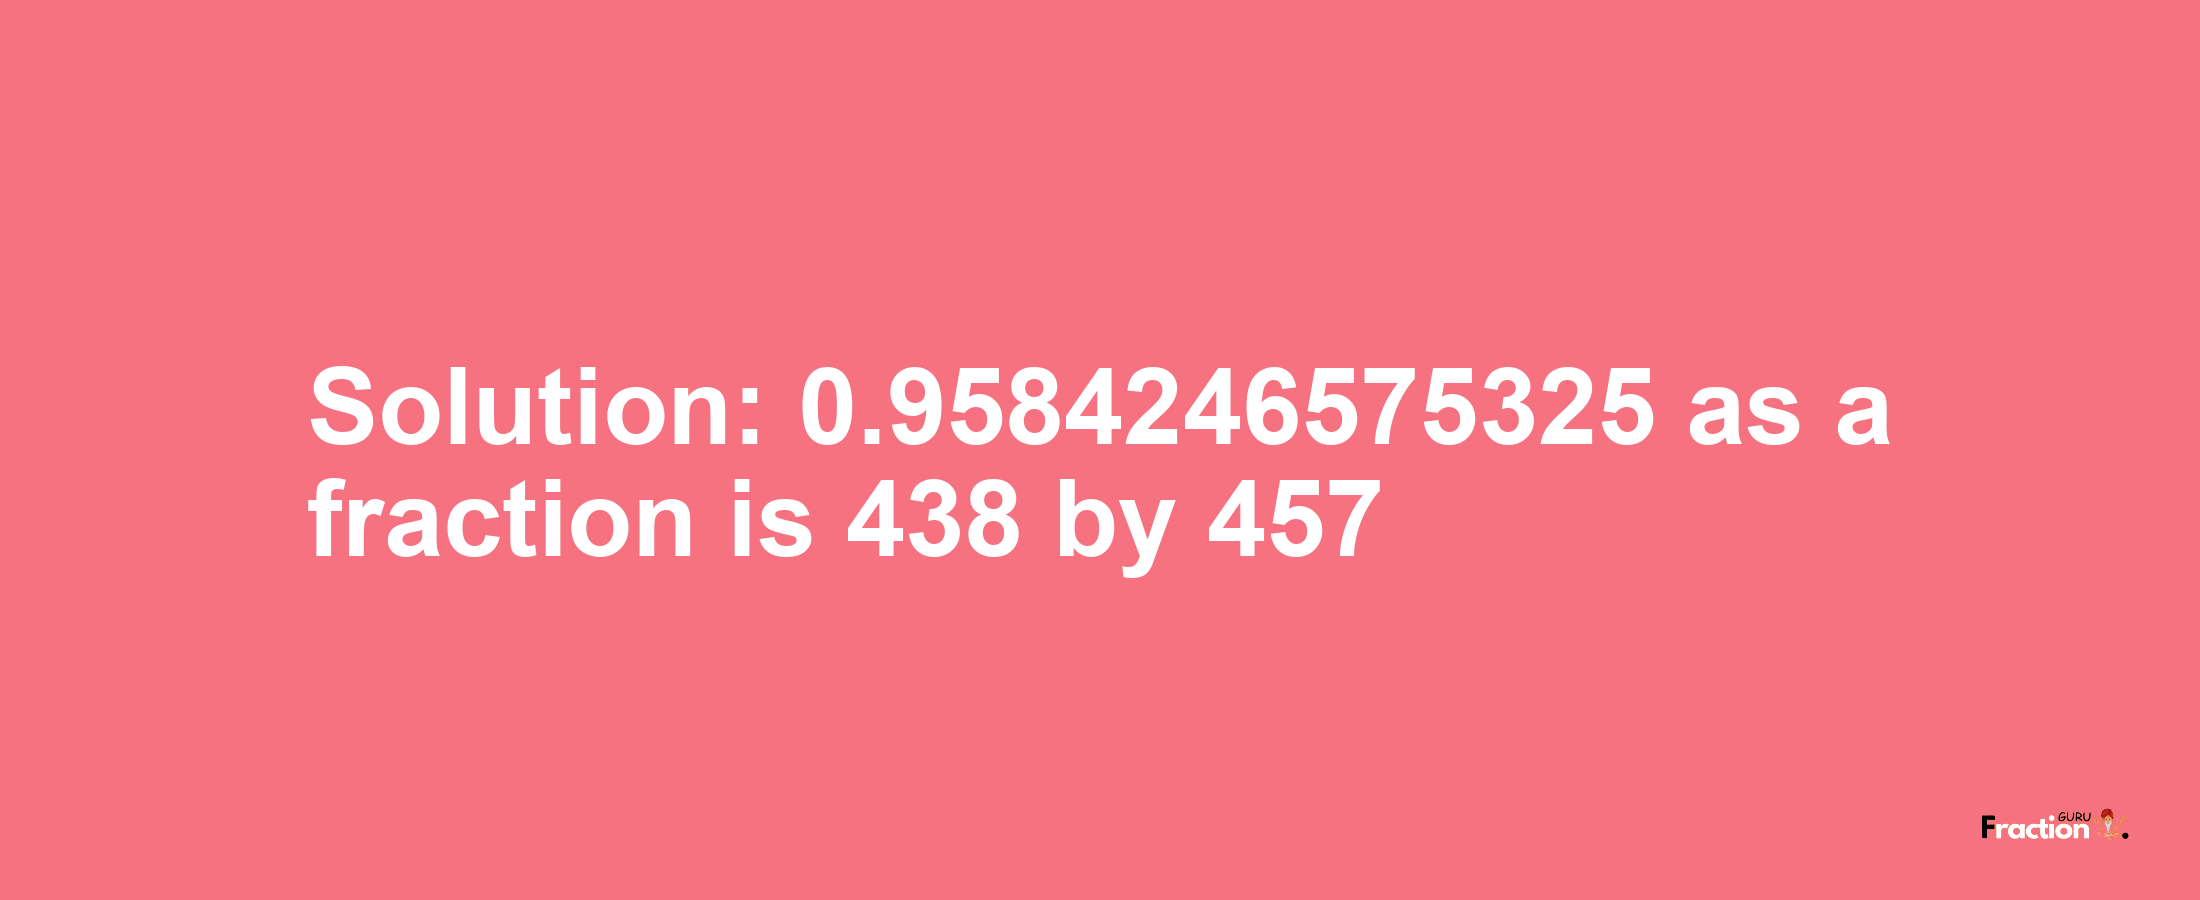 Solution:0.9584246575325 as a fraction is 438/457